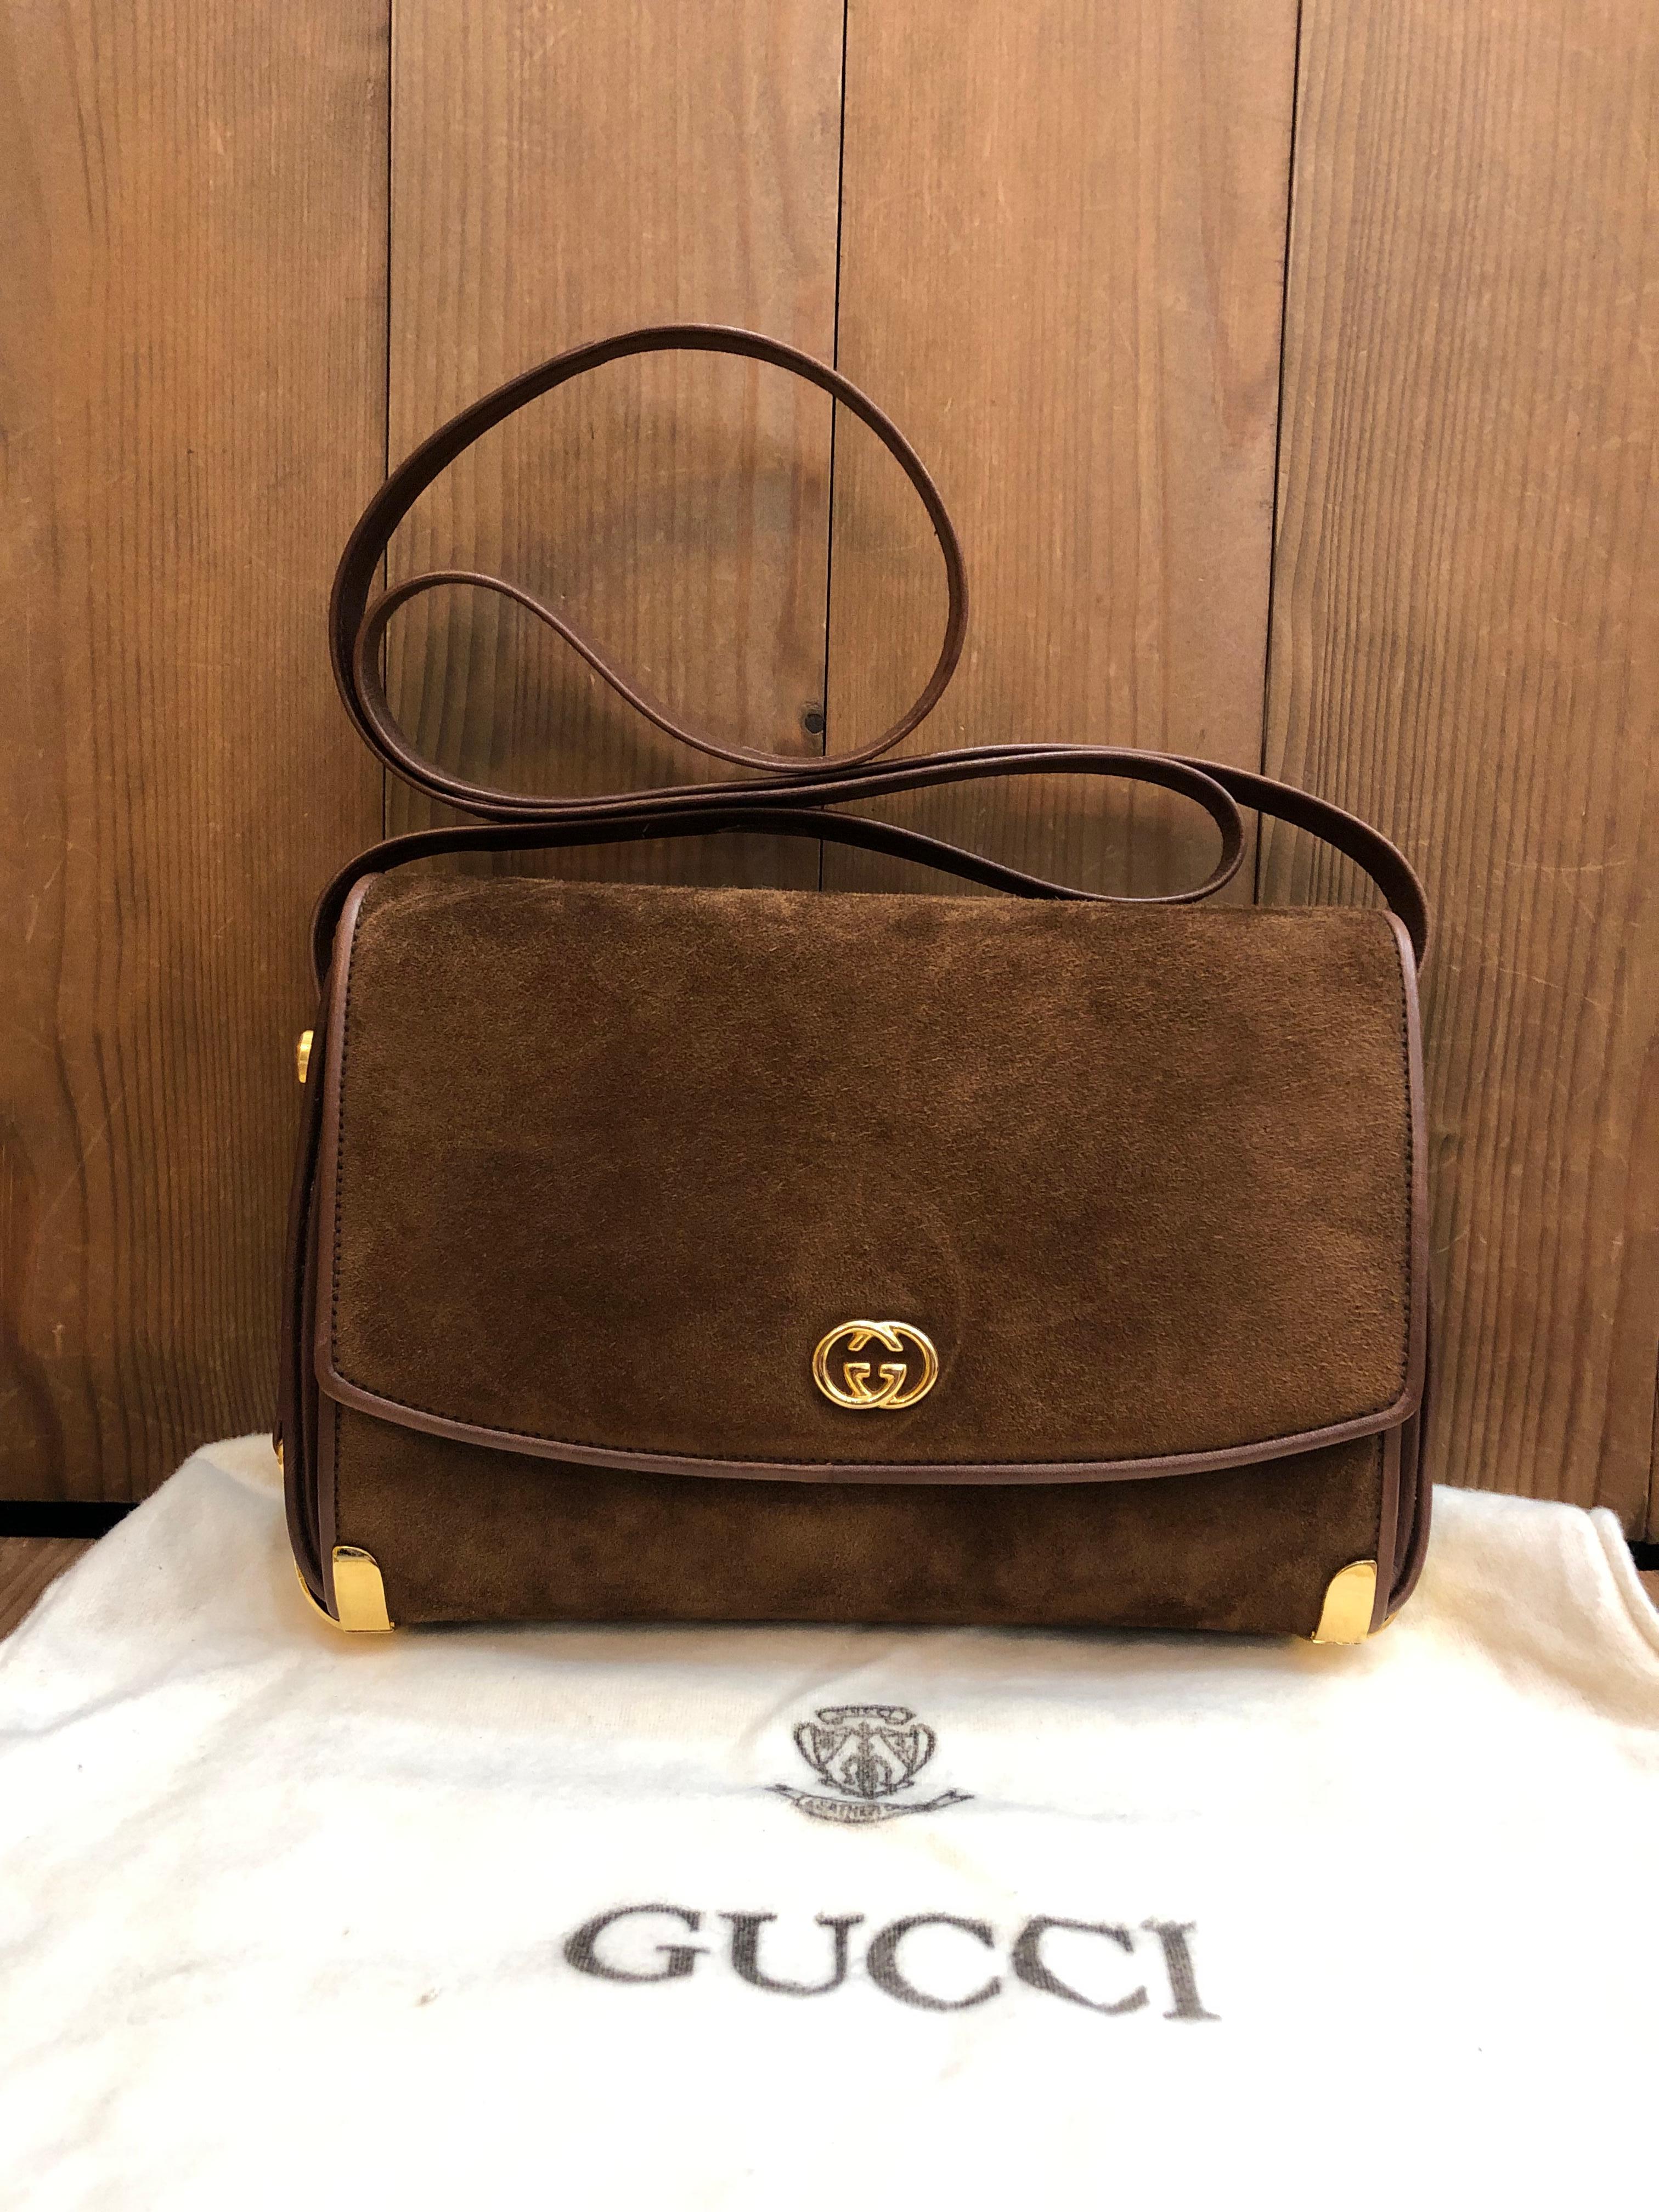 This vintage GUCCI box shoulder bag is crafted of calfskin and nubuck leather in chocolate brown featuring gold toned hardware. Front flap magnetic snap closure opens to three compartments lined with beige leather featuring a zippered pocket.